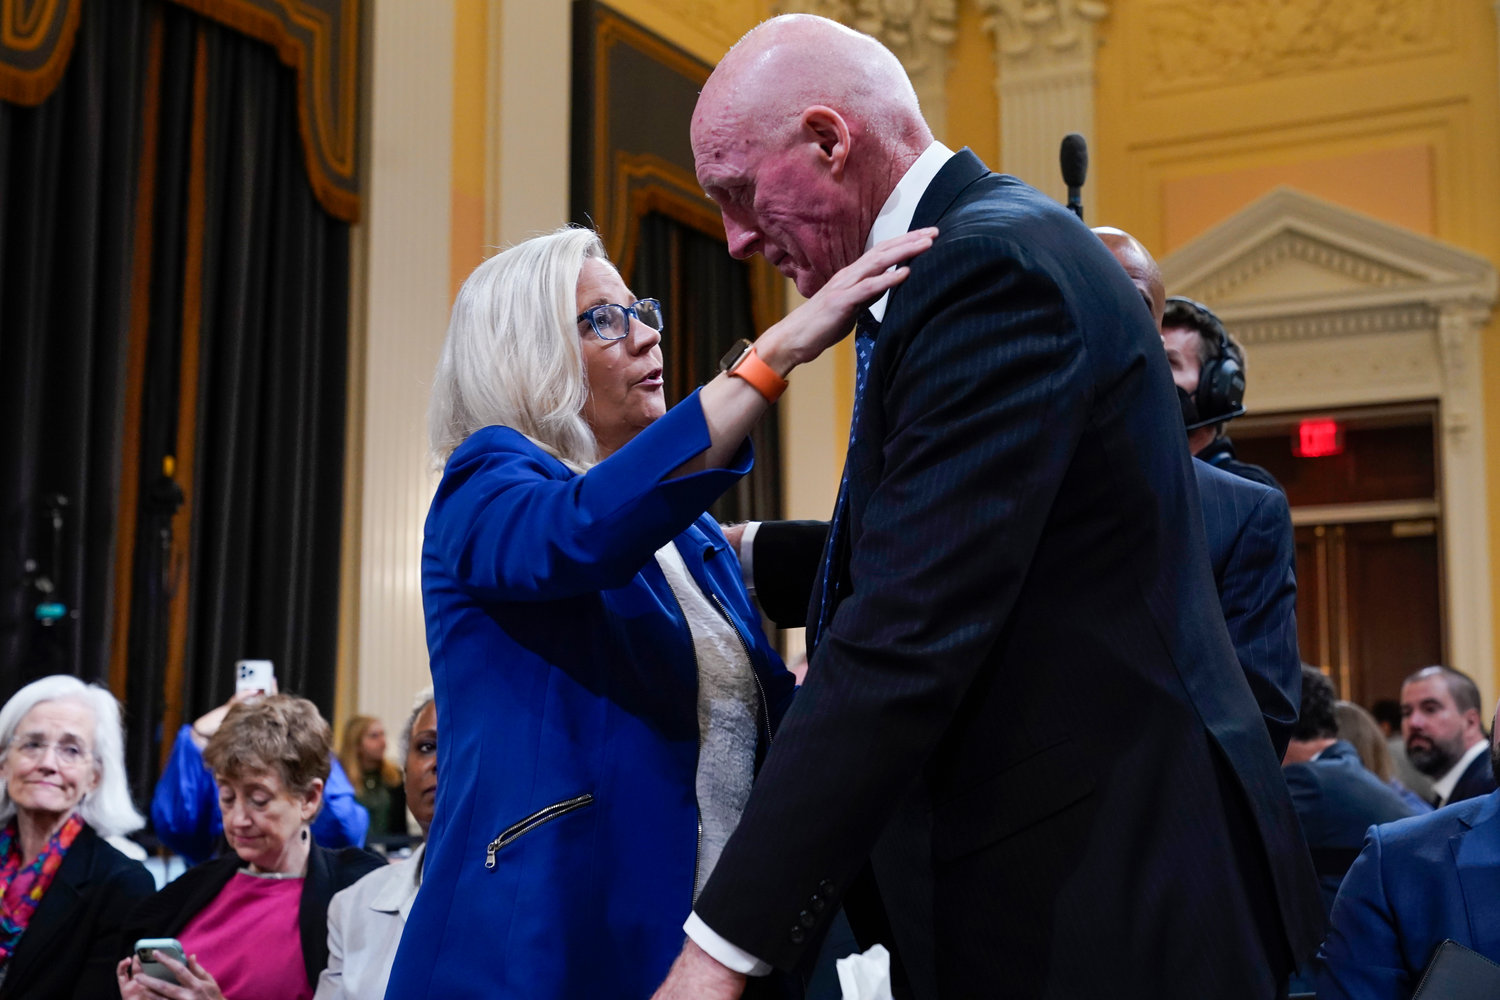 Vice chair Rep. Liz Cheney, R-Wyo., hugs Rusty Bowers, Arizona state House Speaker, during a break as the House select committee investigating the Jan. 6 attack on the U.S. Capitol continues to reveal its findings of a year-long investigation, at the Capitol in Washington Tuesday.